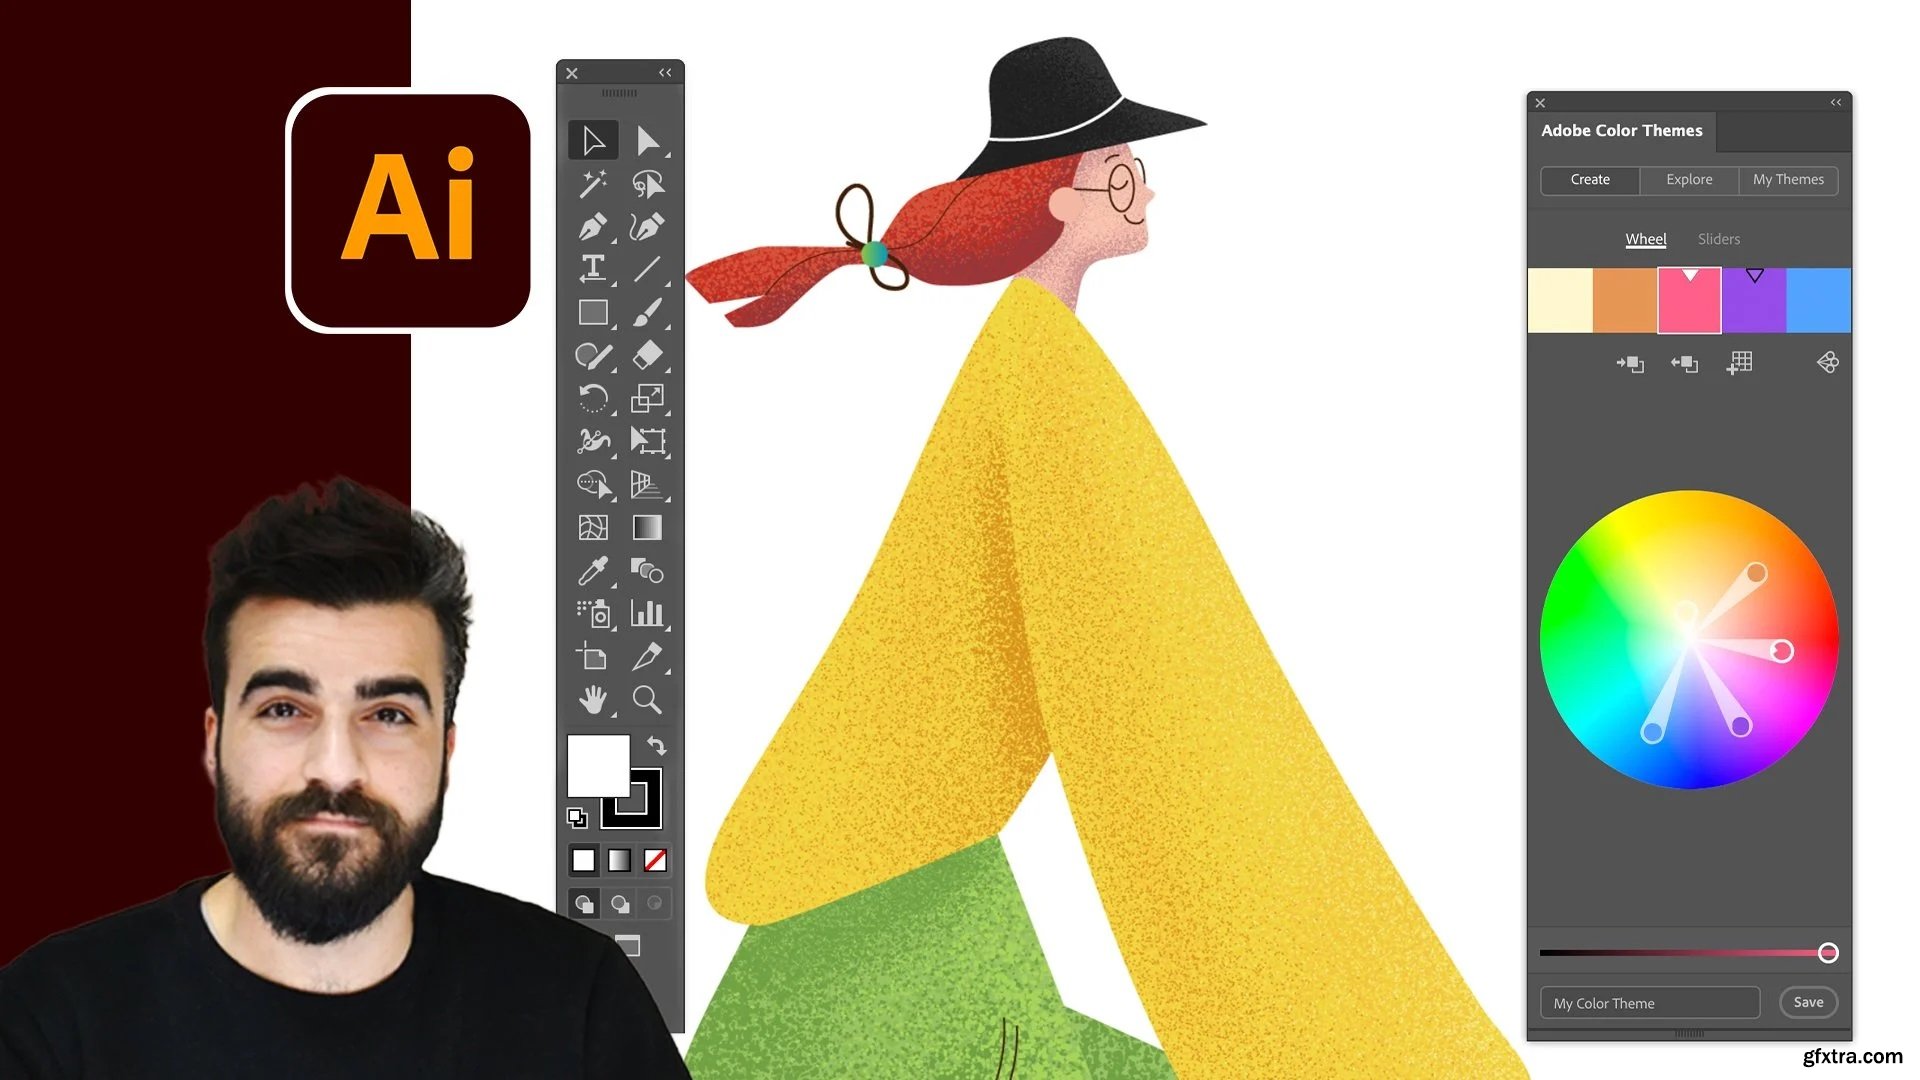 free adobe illustrator course for beginners